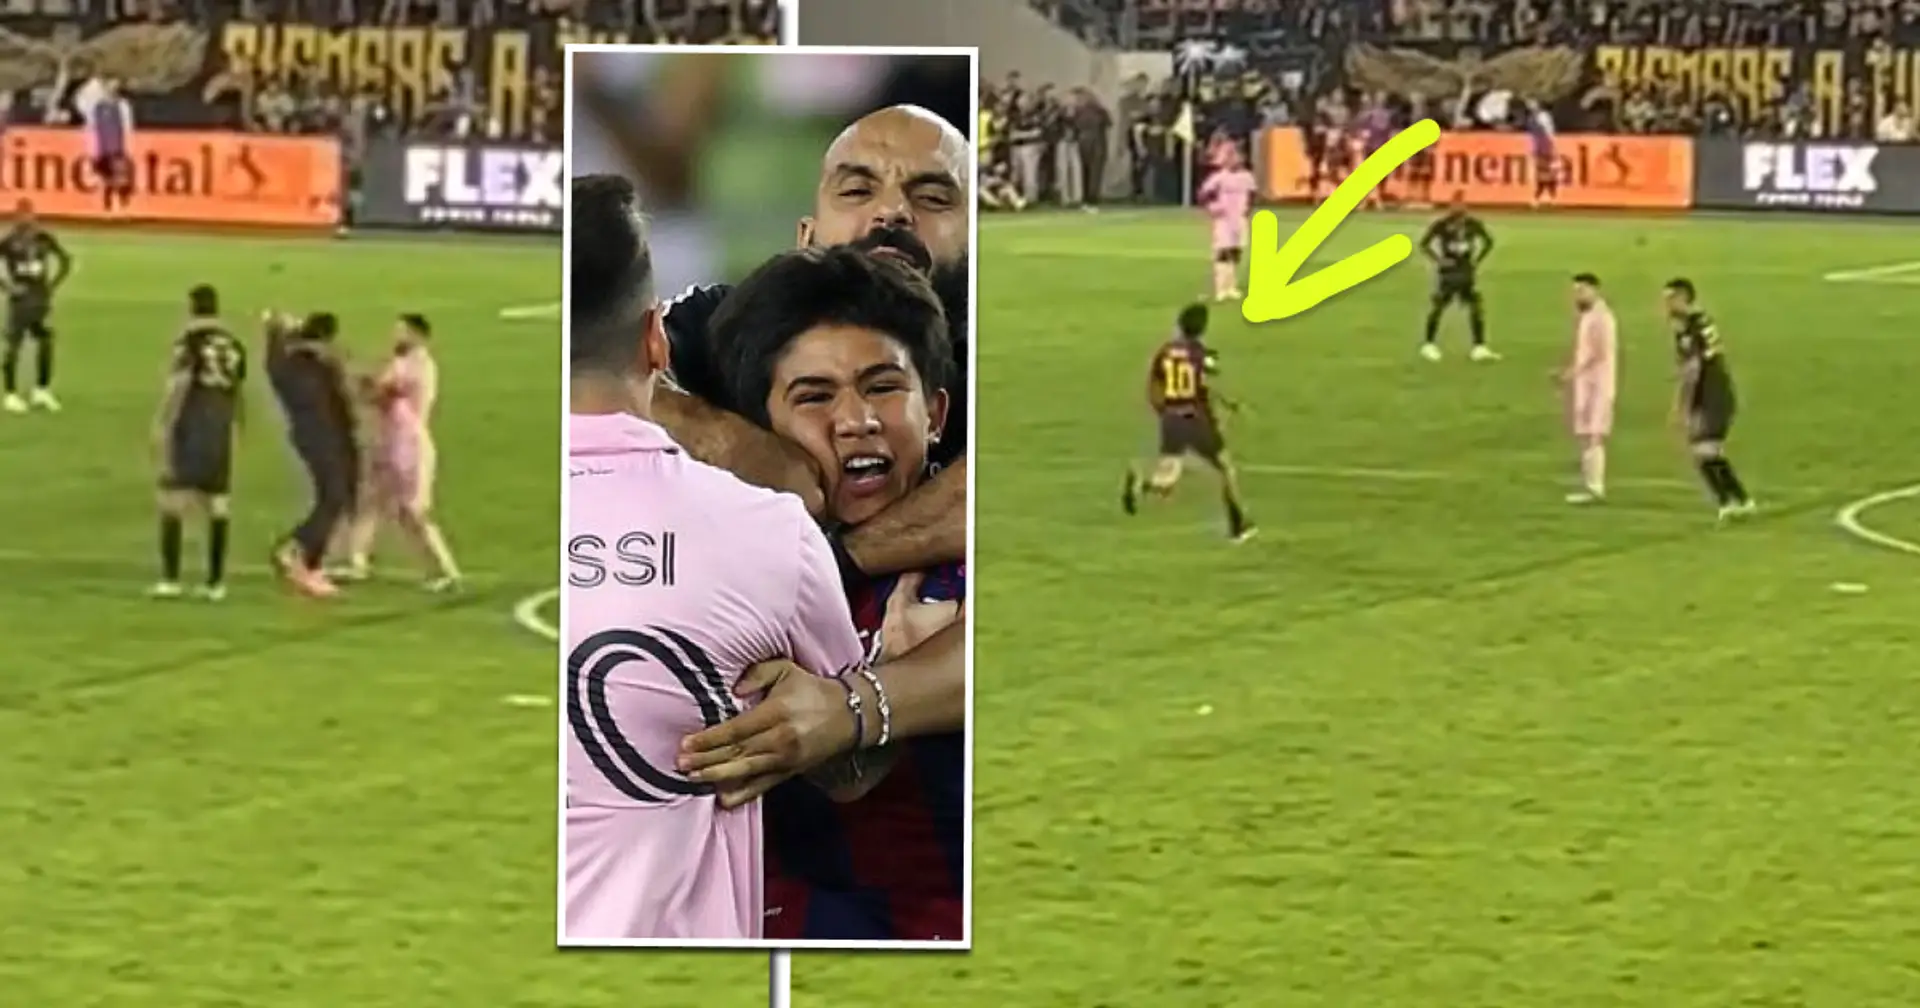 Messi's bodyguard wrestles kid pitch invader right on the pitch - spotted